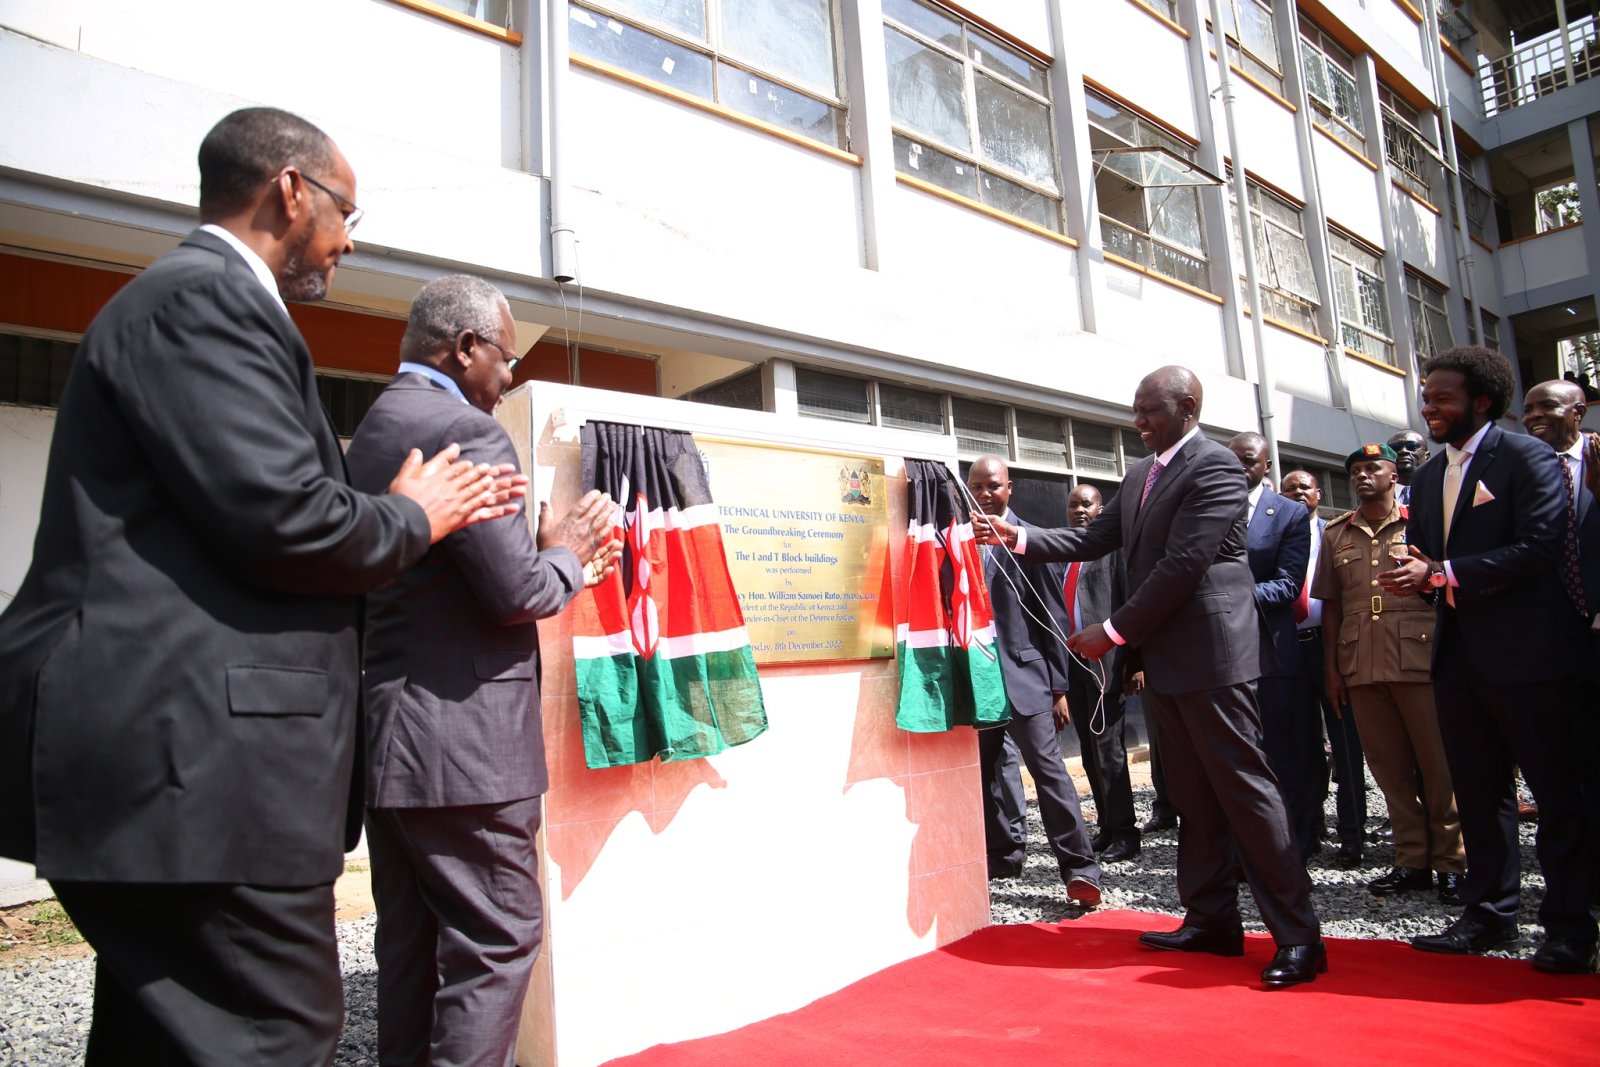 His Excellency Hon. Dr William Samoei Ruto, The President of the Republic of Kenya, visits TU-K